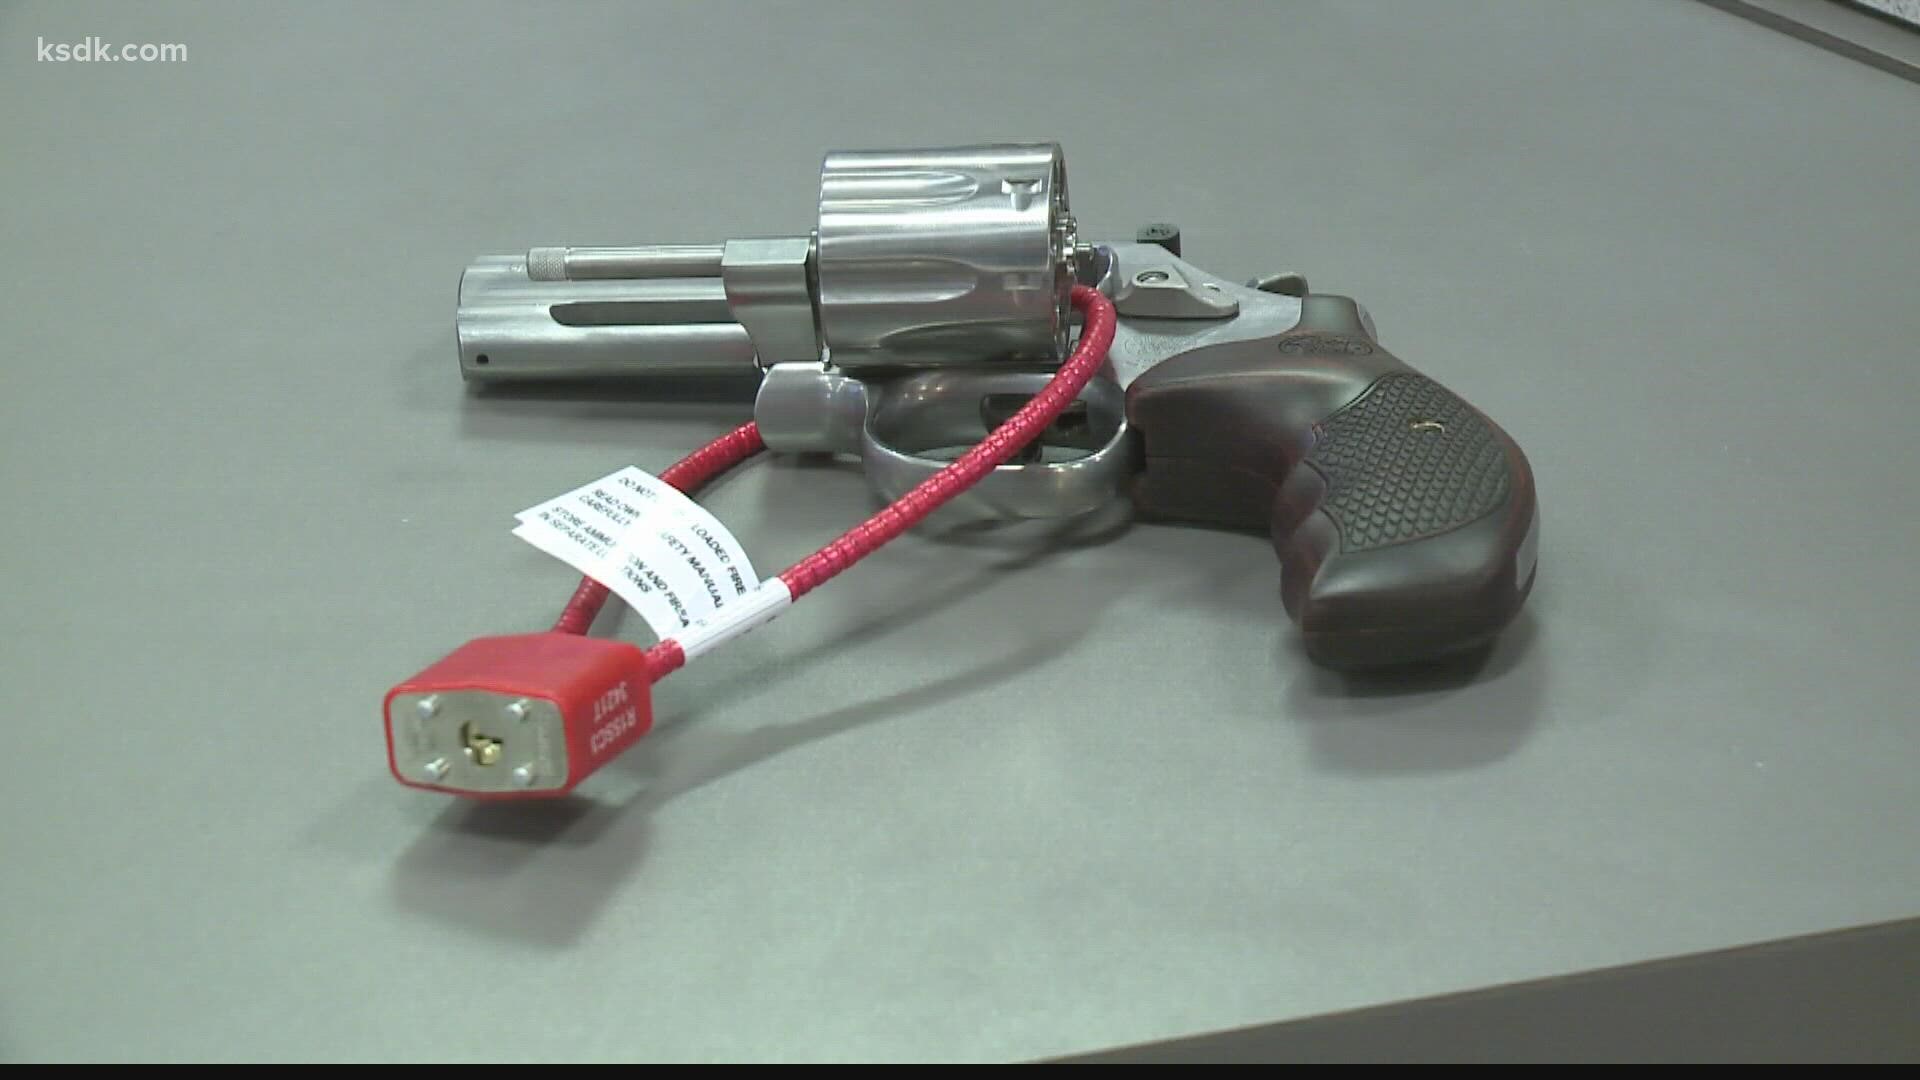 School leaders are working to stop gun violence and accidental shootings of children. A series of upcoming events will distribute gun locks and educate parents.